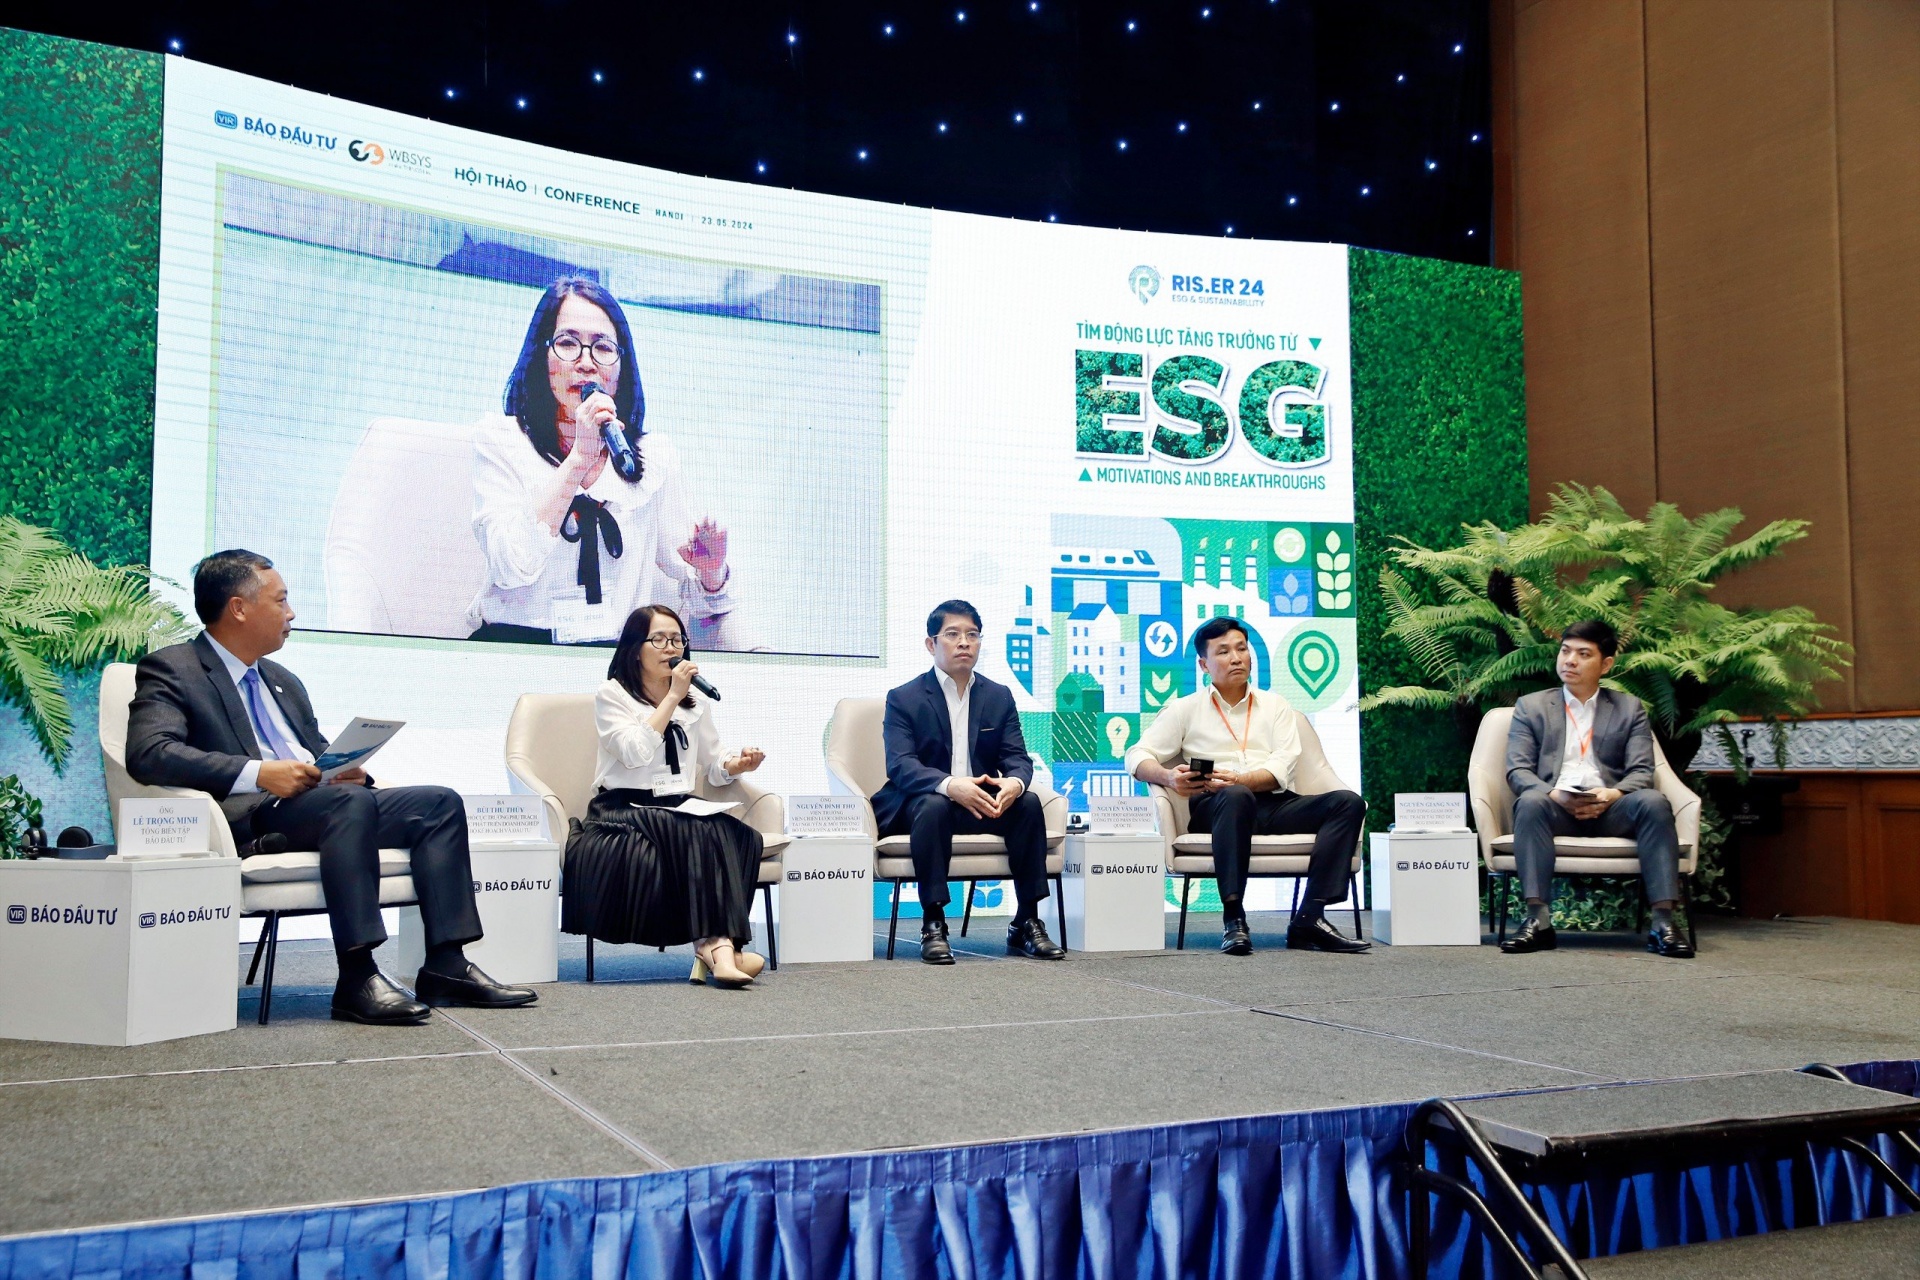 Most businesses aware of ESG: report